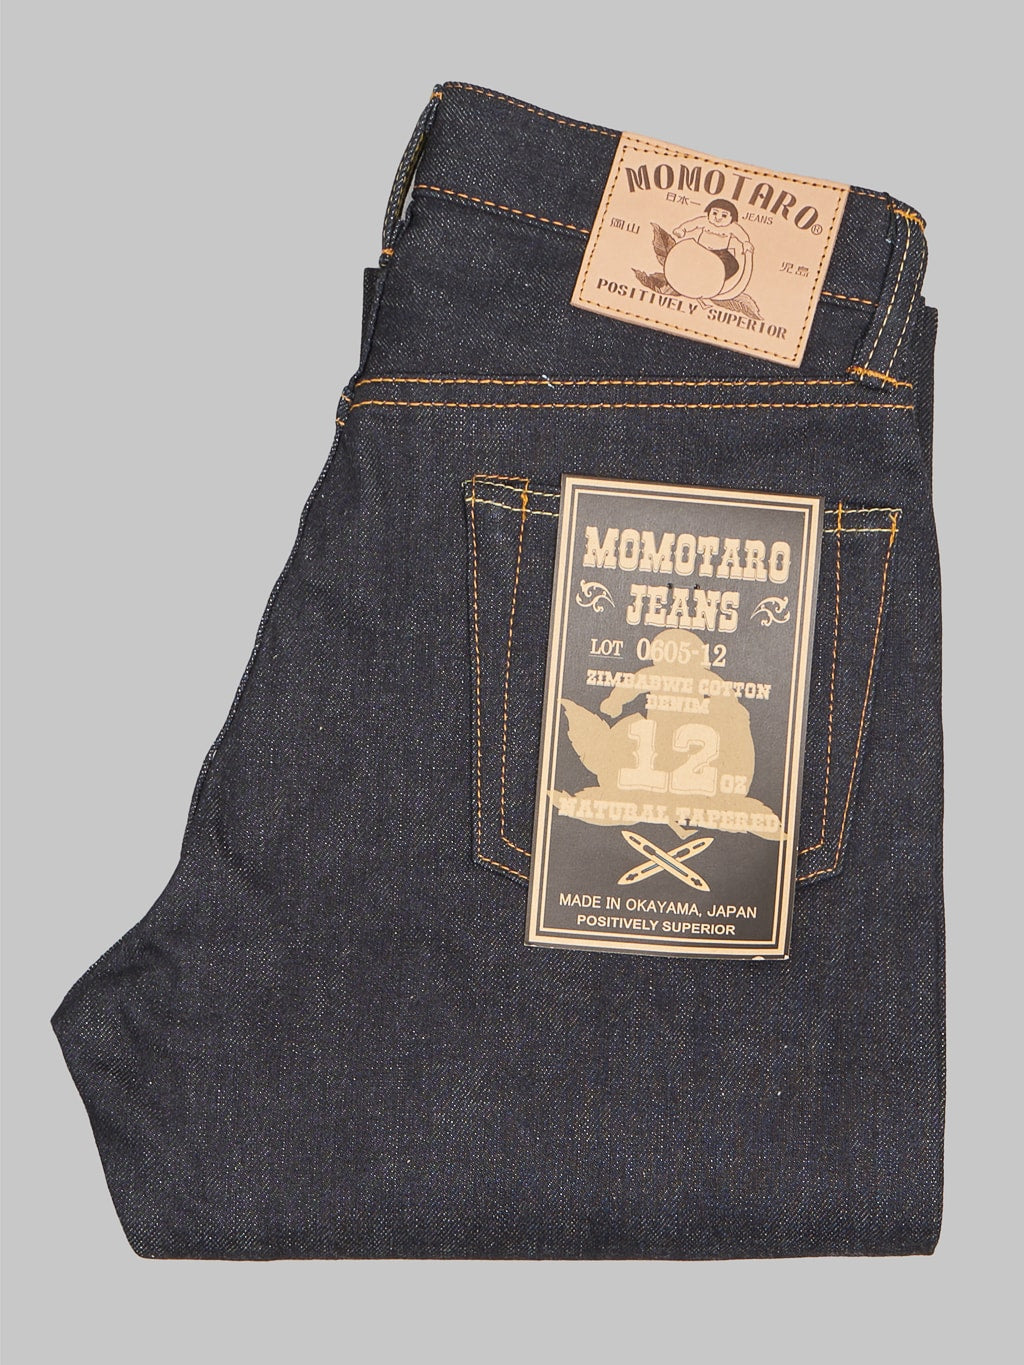 Momotaro 0605 12oz Natural Tapered Jeans made in japan